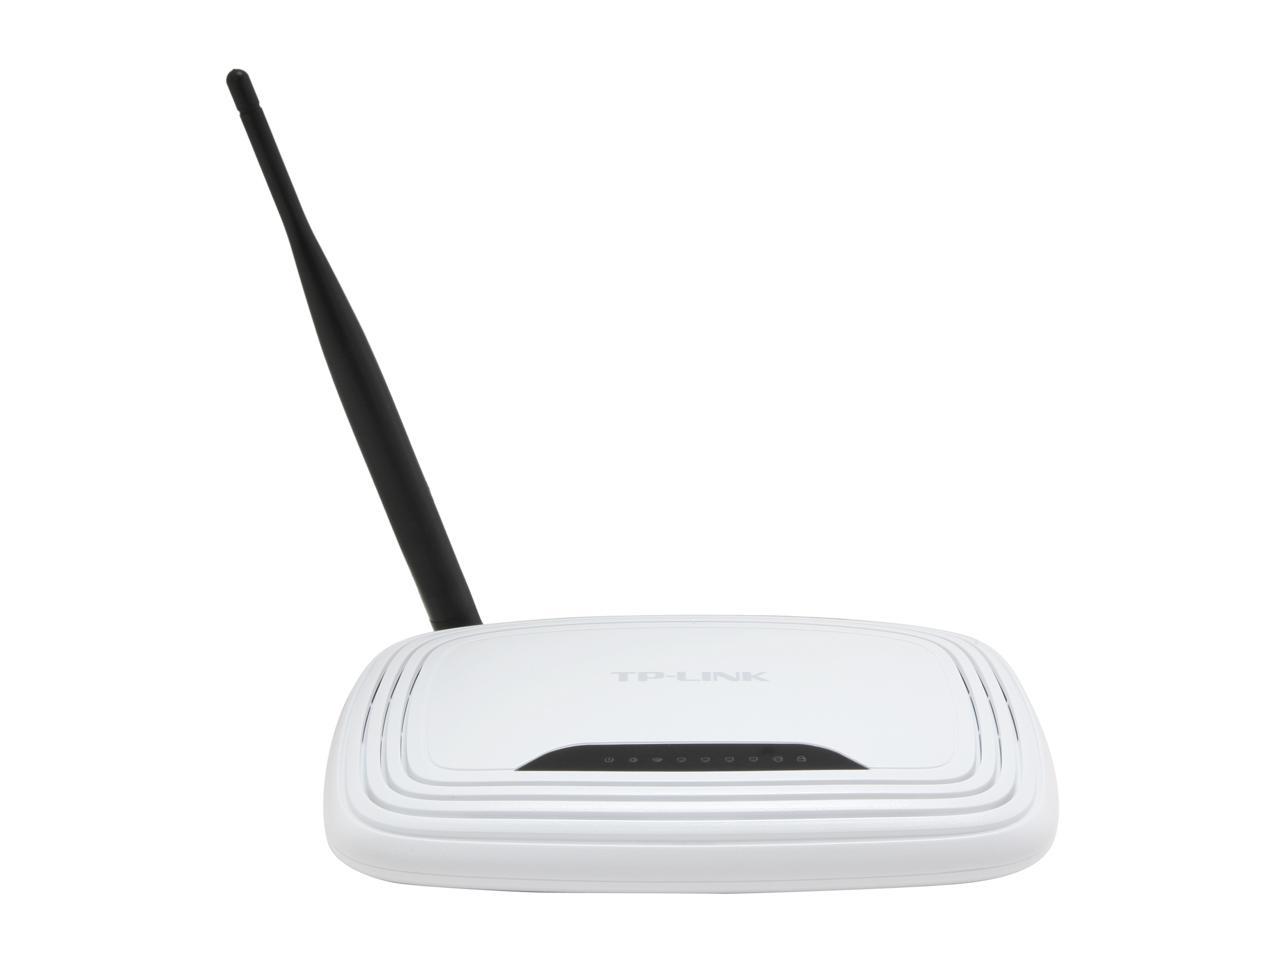 Authentication tuition fee proposition TP-LINK TL-WR740N Wireless Router 802.11b/g/n up to 150Mbps/ 10/100 Mbps  Ethernet Port x4 - Newegg.com